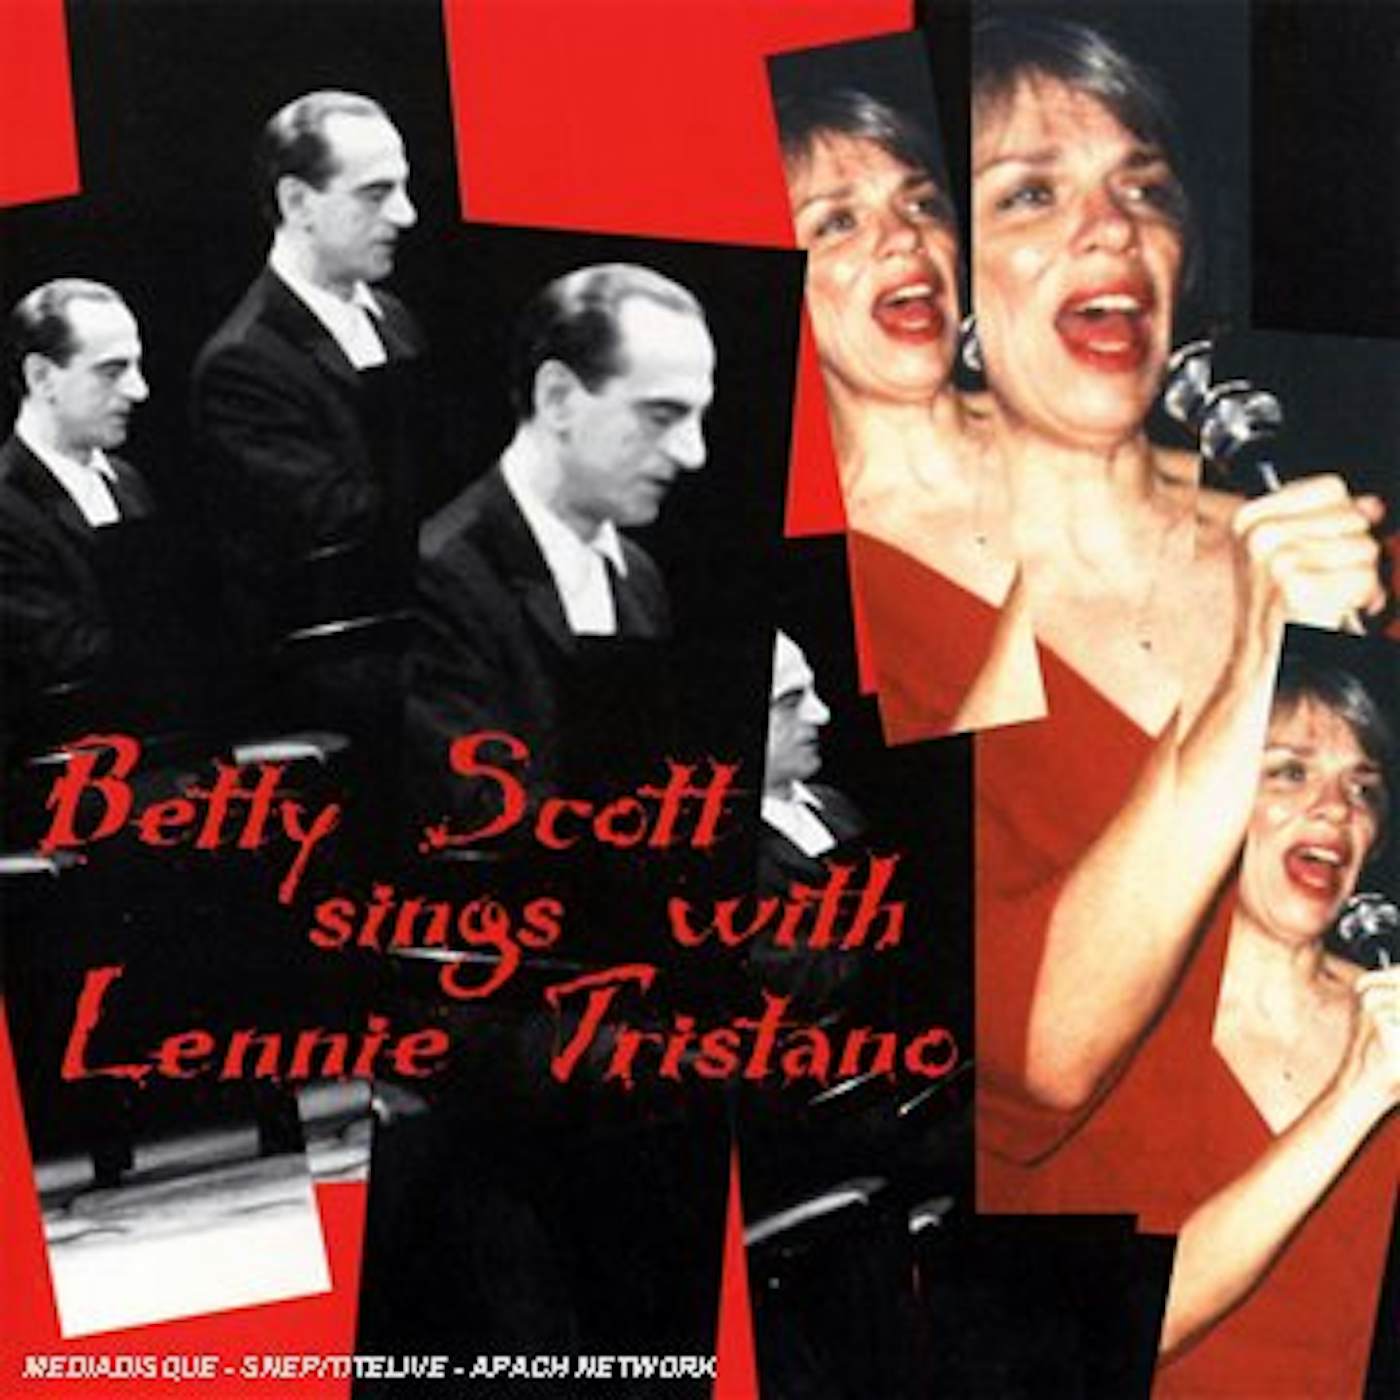 BETTY SCOTT SINGS WITH LENNIE TRISTANO CD